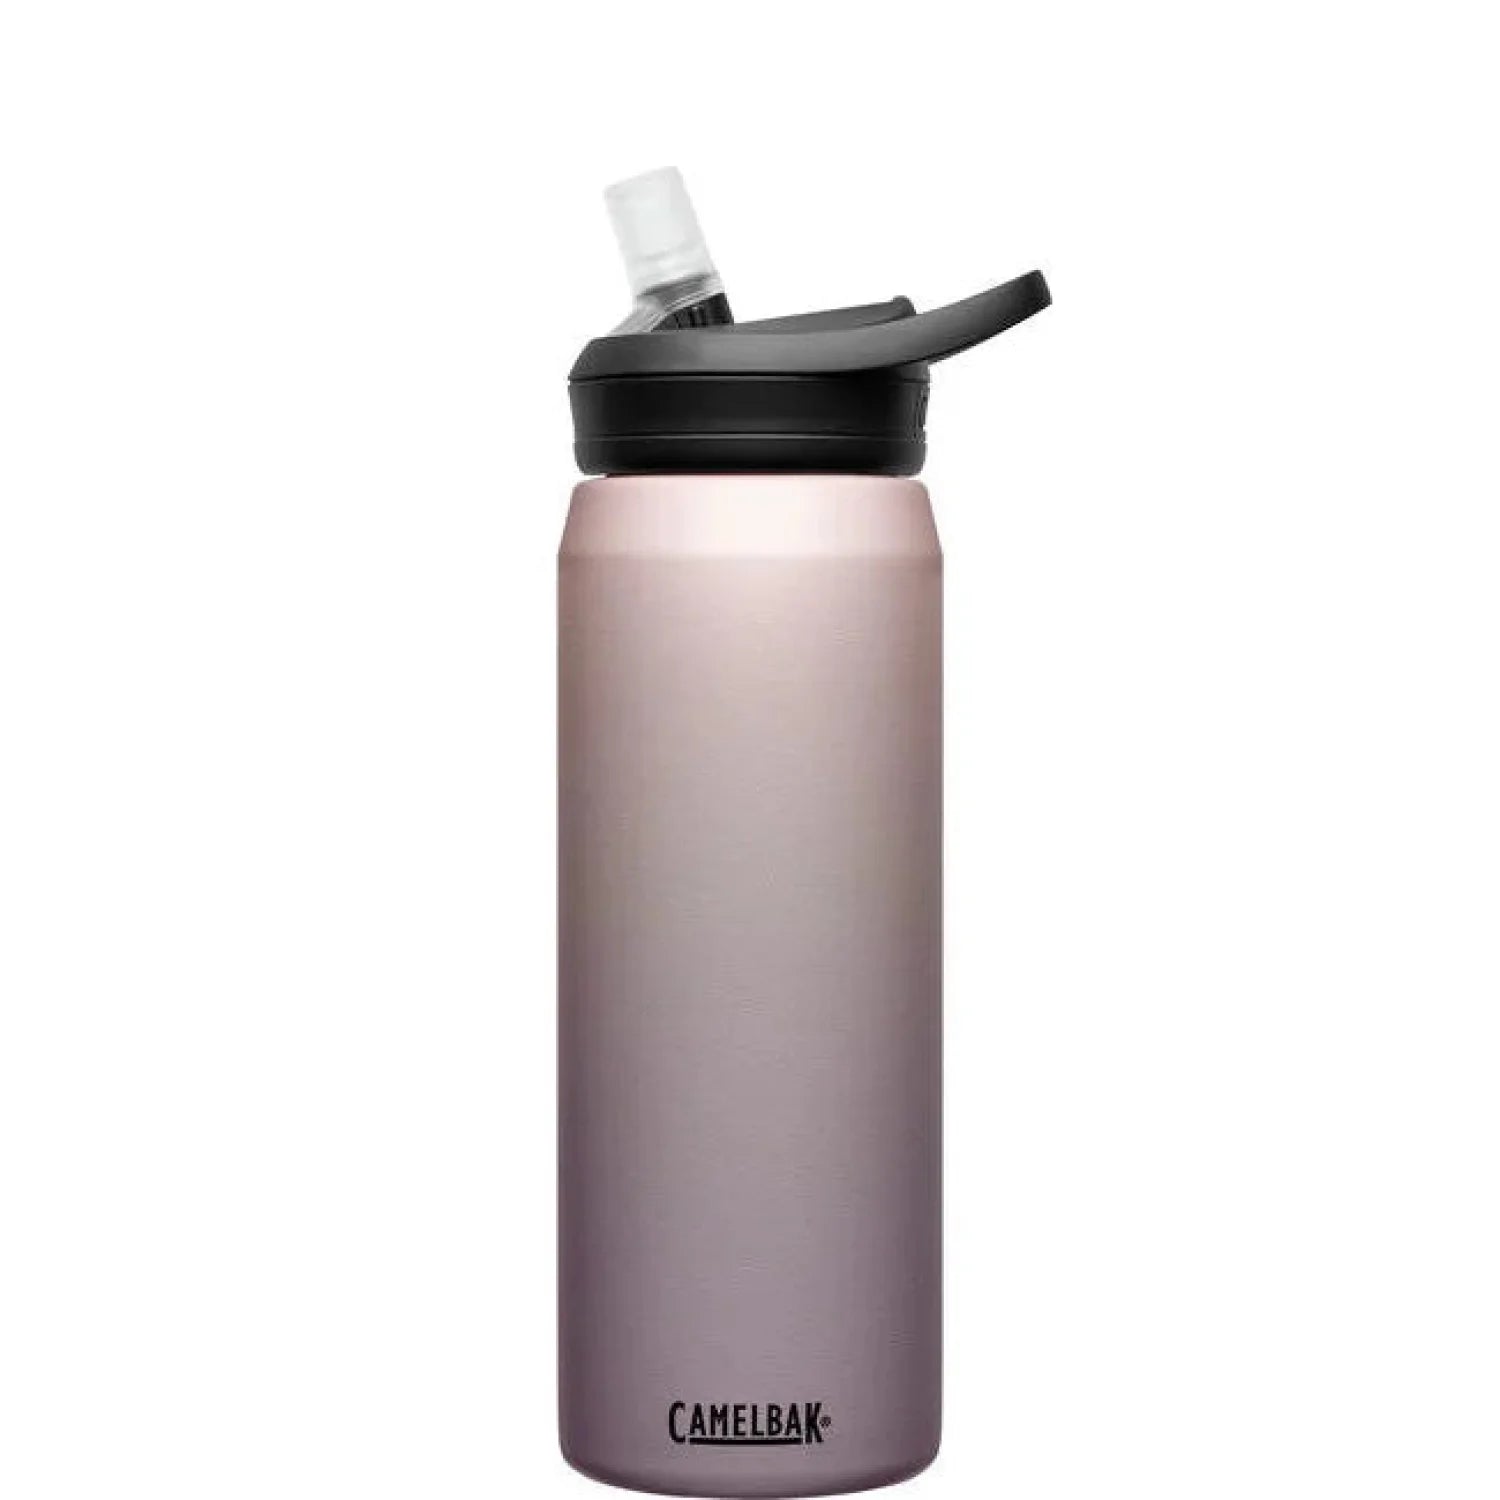 Camelbak 25oz. Eddy Stainless Steel Water Bottle in Rose Gold Sky. Stainless Steel body construction with BPA Free Lid and Eddy Bite Valve. Side View.